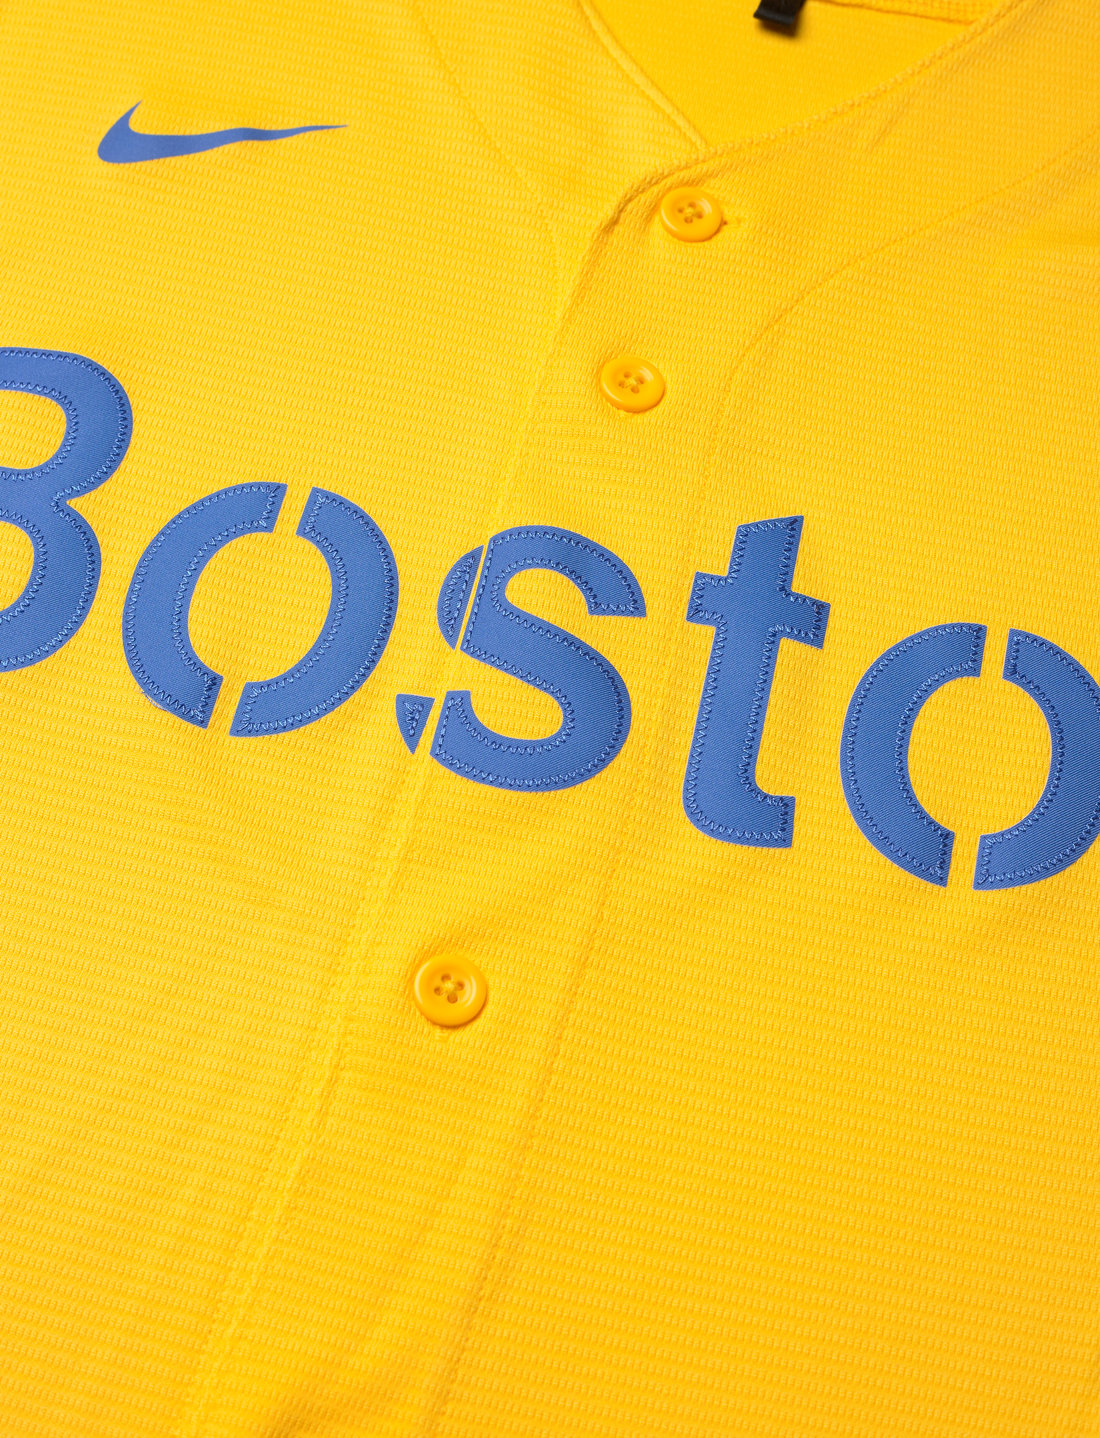 boston red sox connect jersey